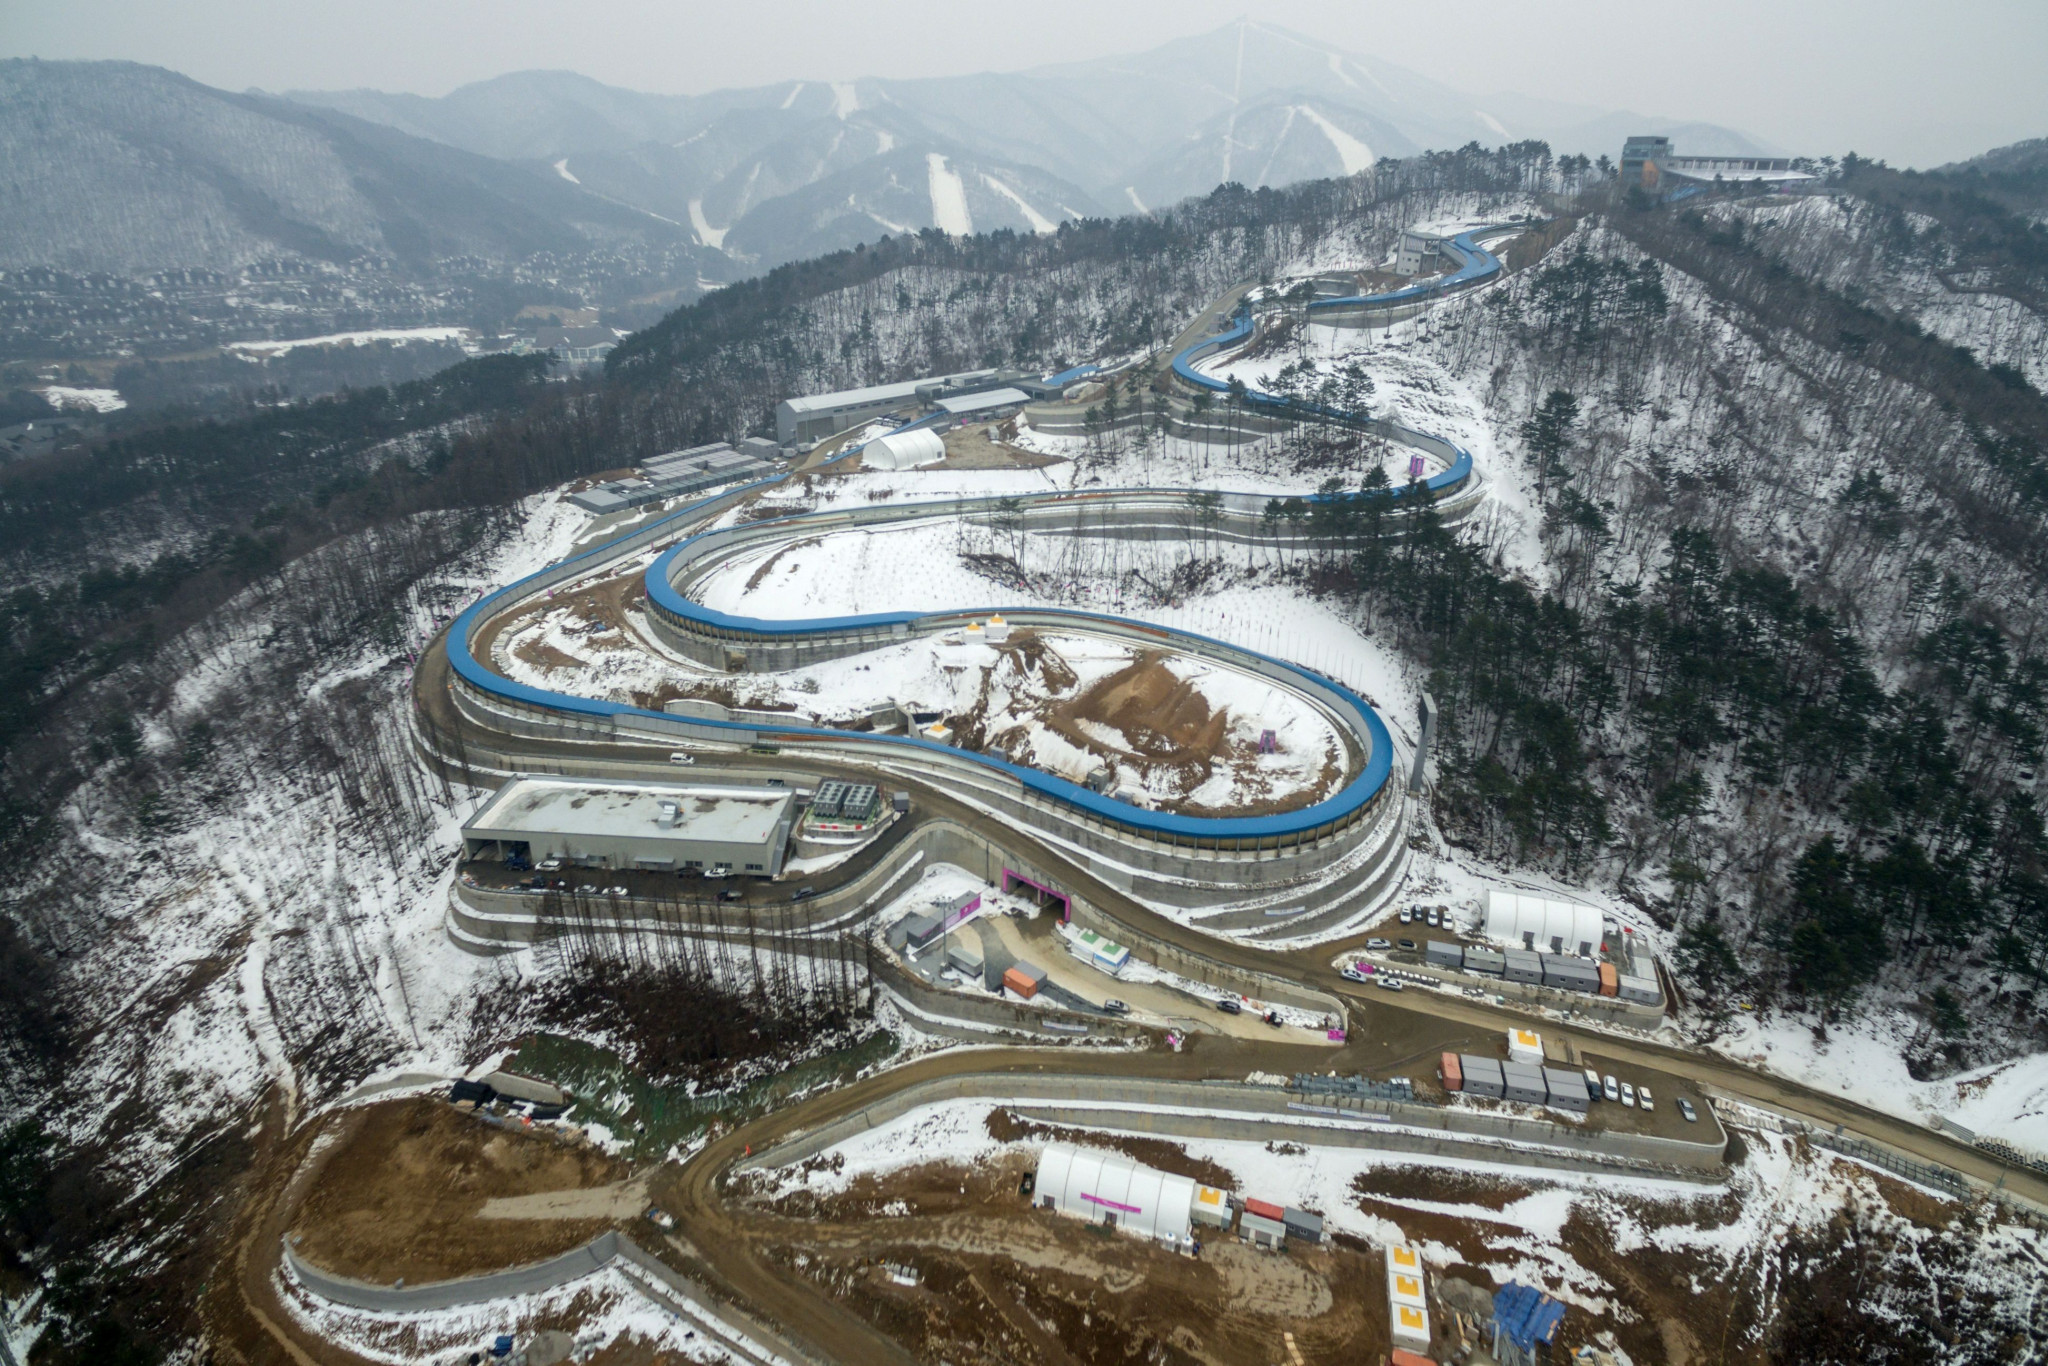 Additional Government funding has been unveiled in connection with Pyeongchang 2018 ©Getty Images